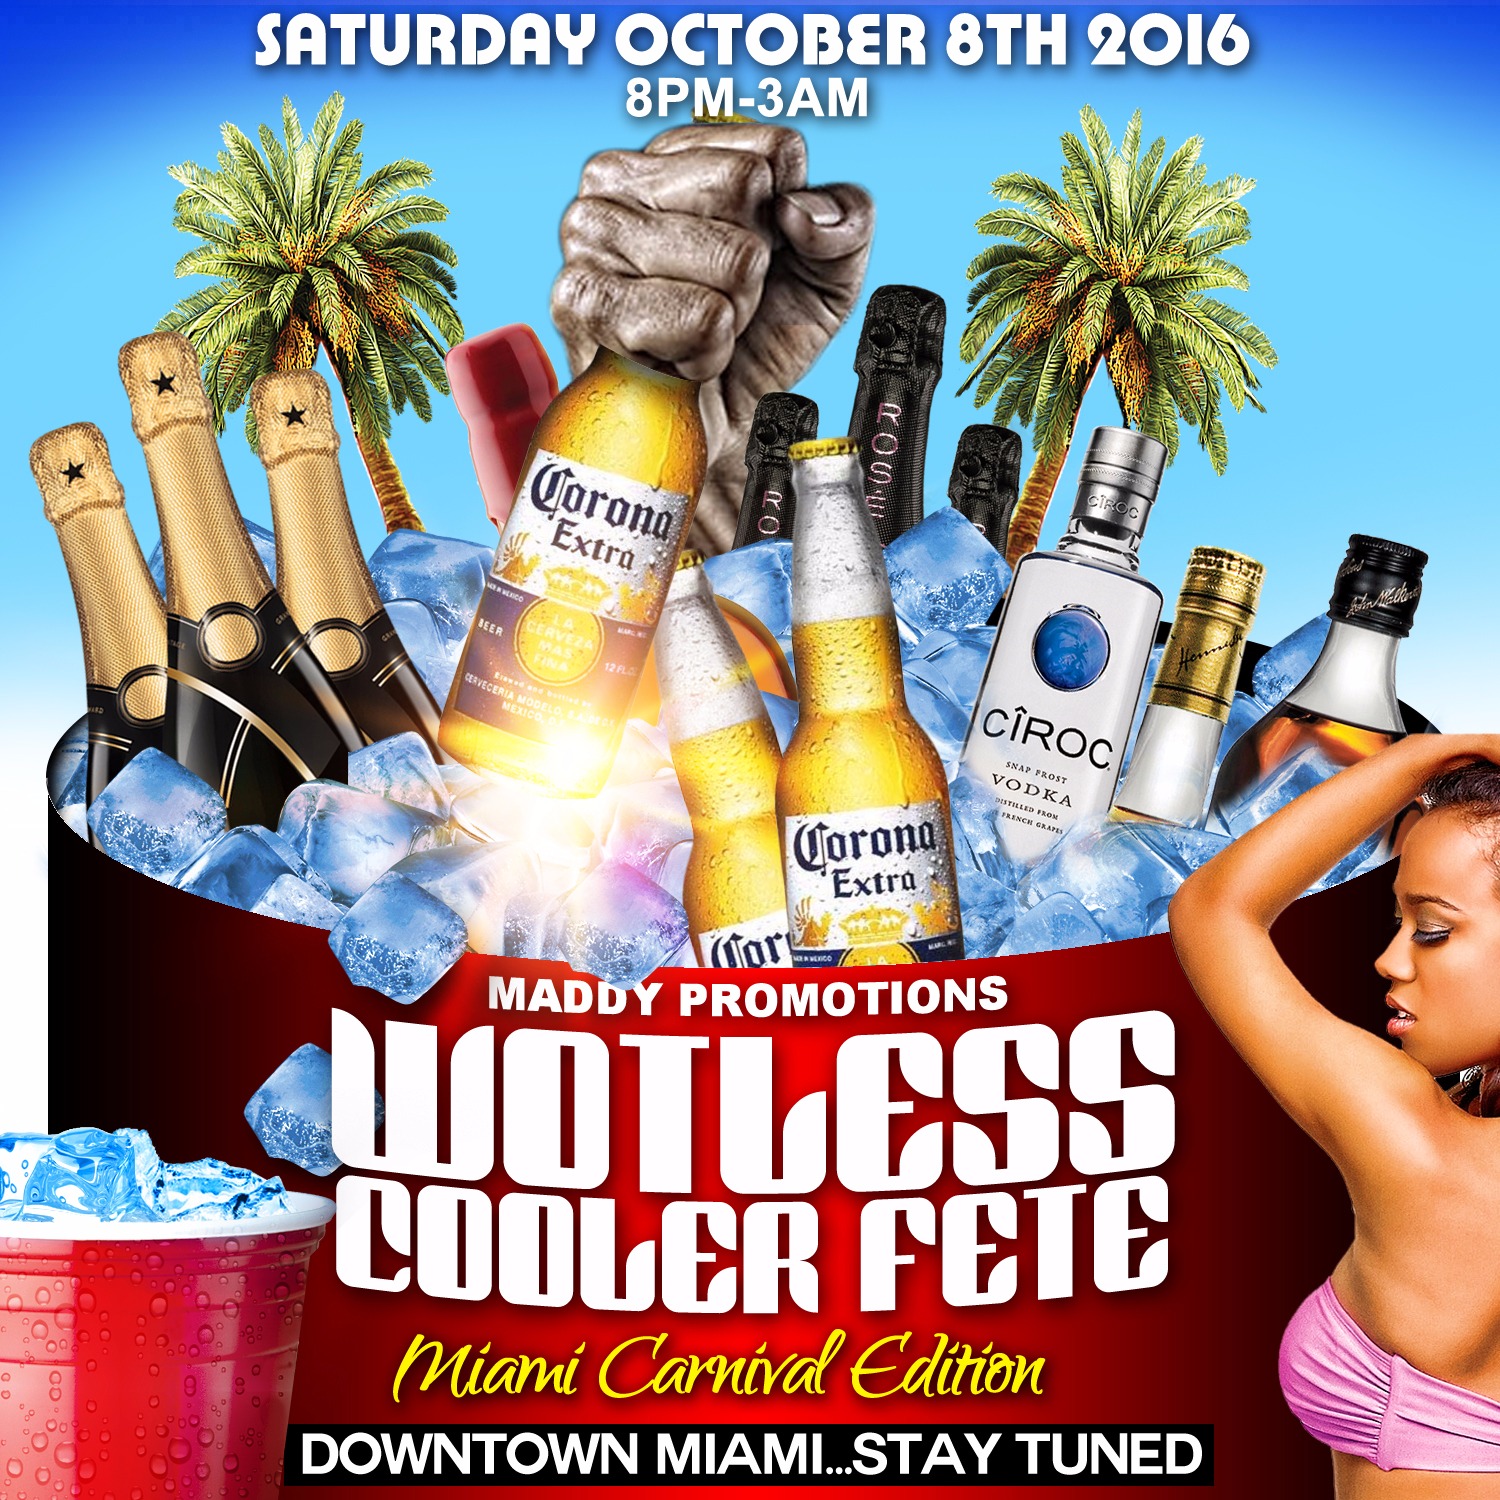 Wotless Cooler Fete Miami Carnival 